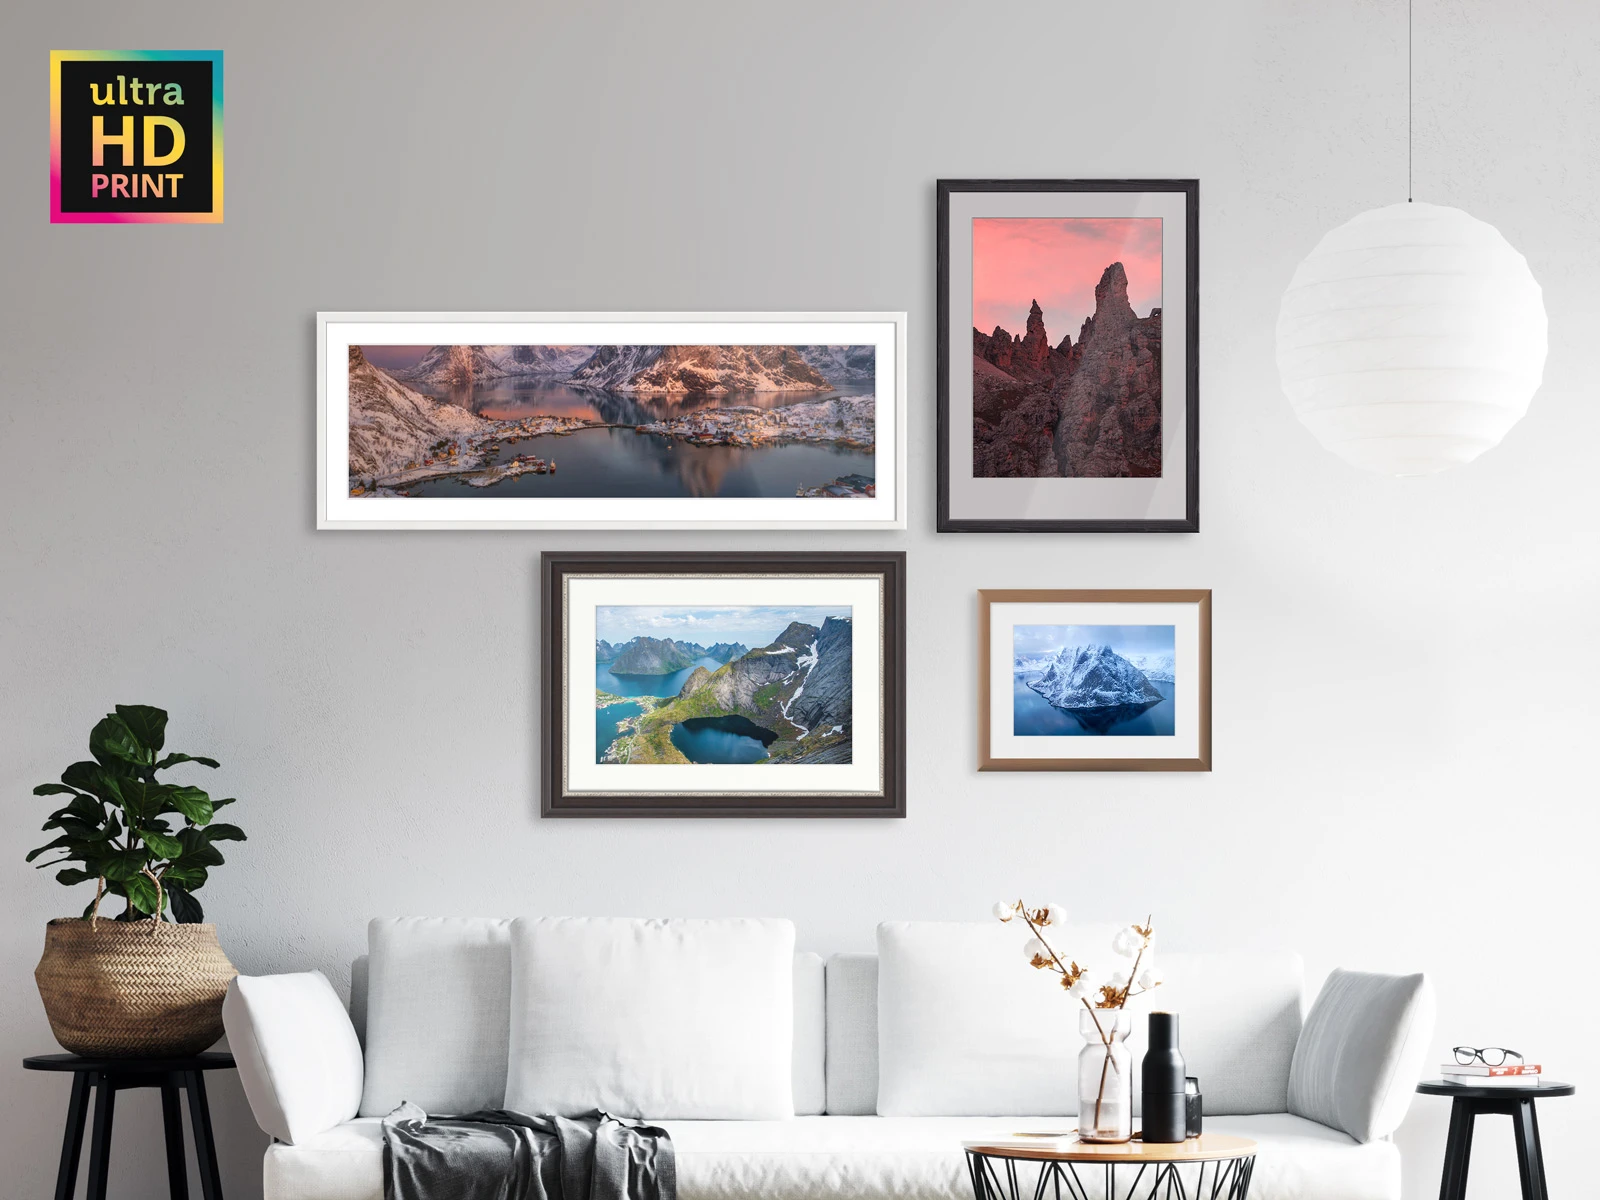 several metallic ultraHD photo prints on Fuji Crystal Pearl paper in frames hanging on a wall.